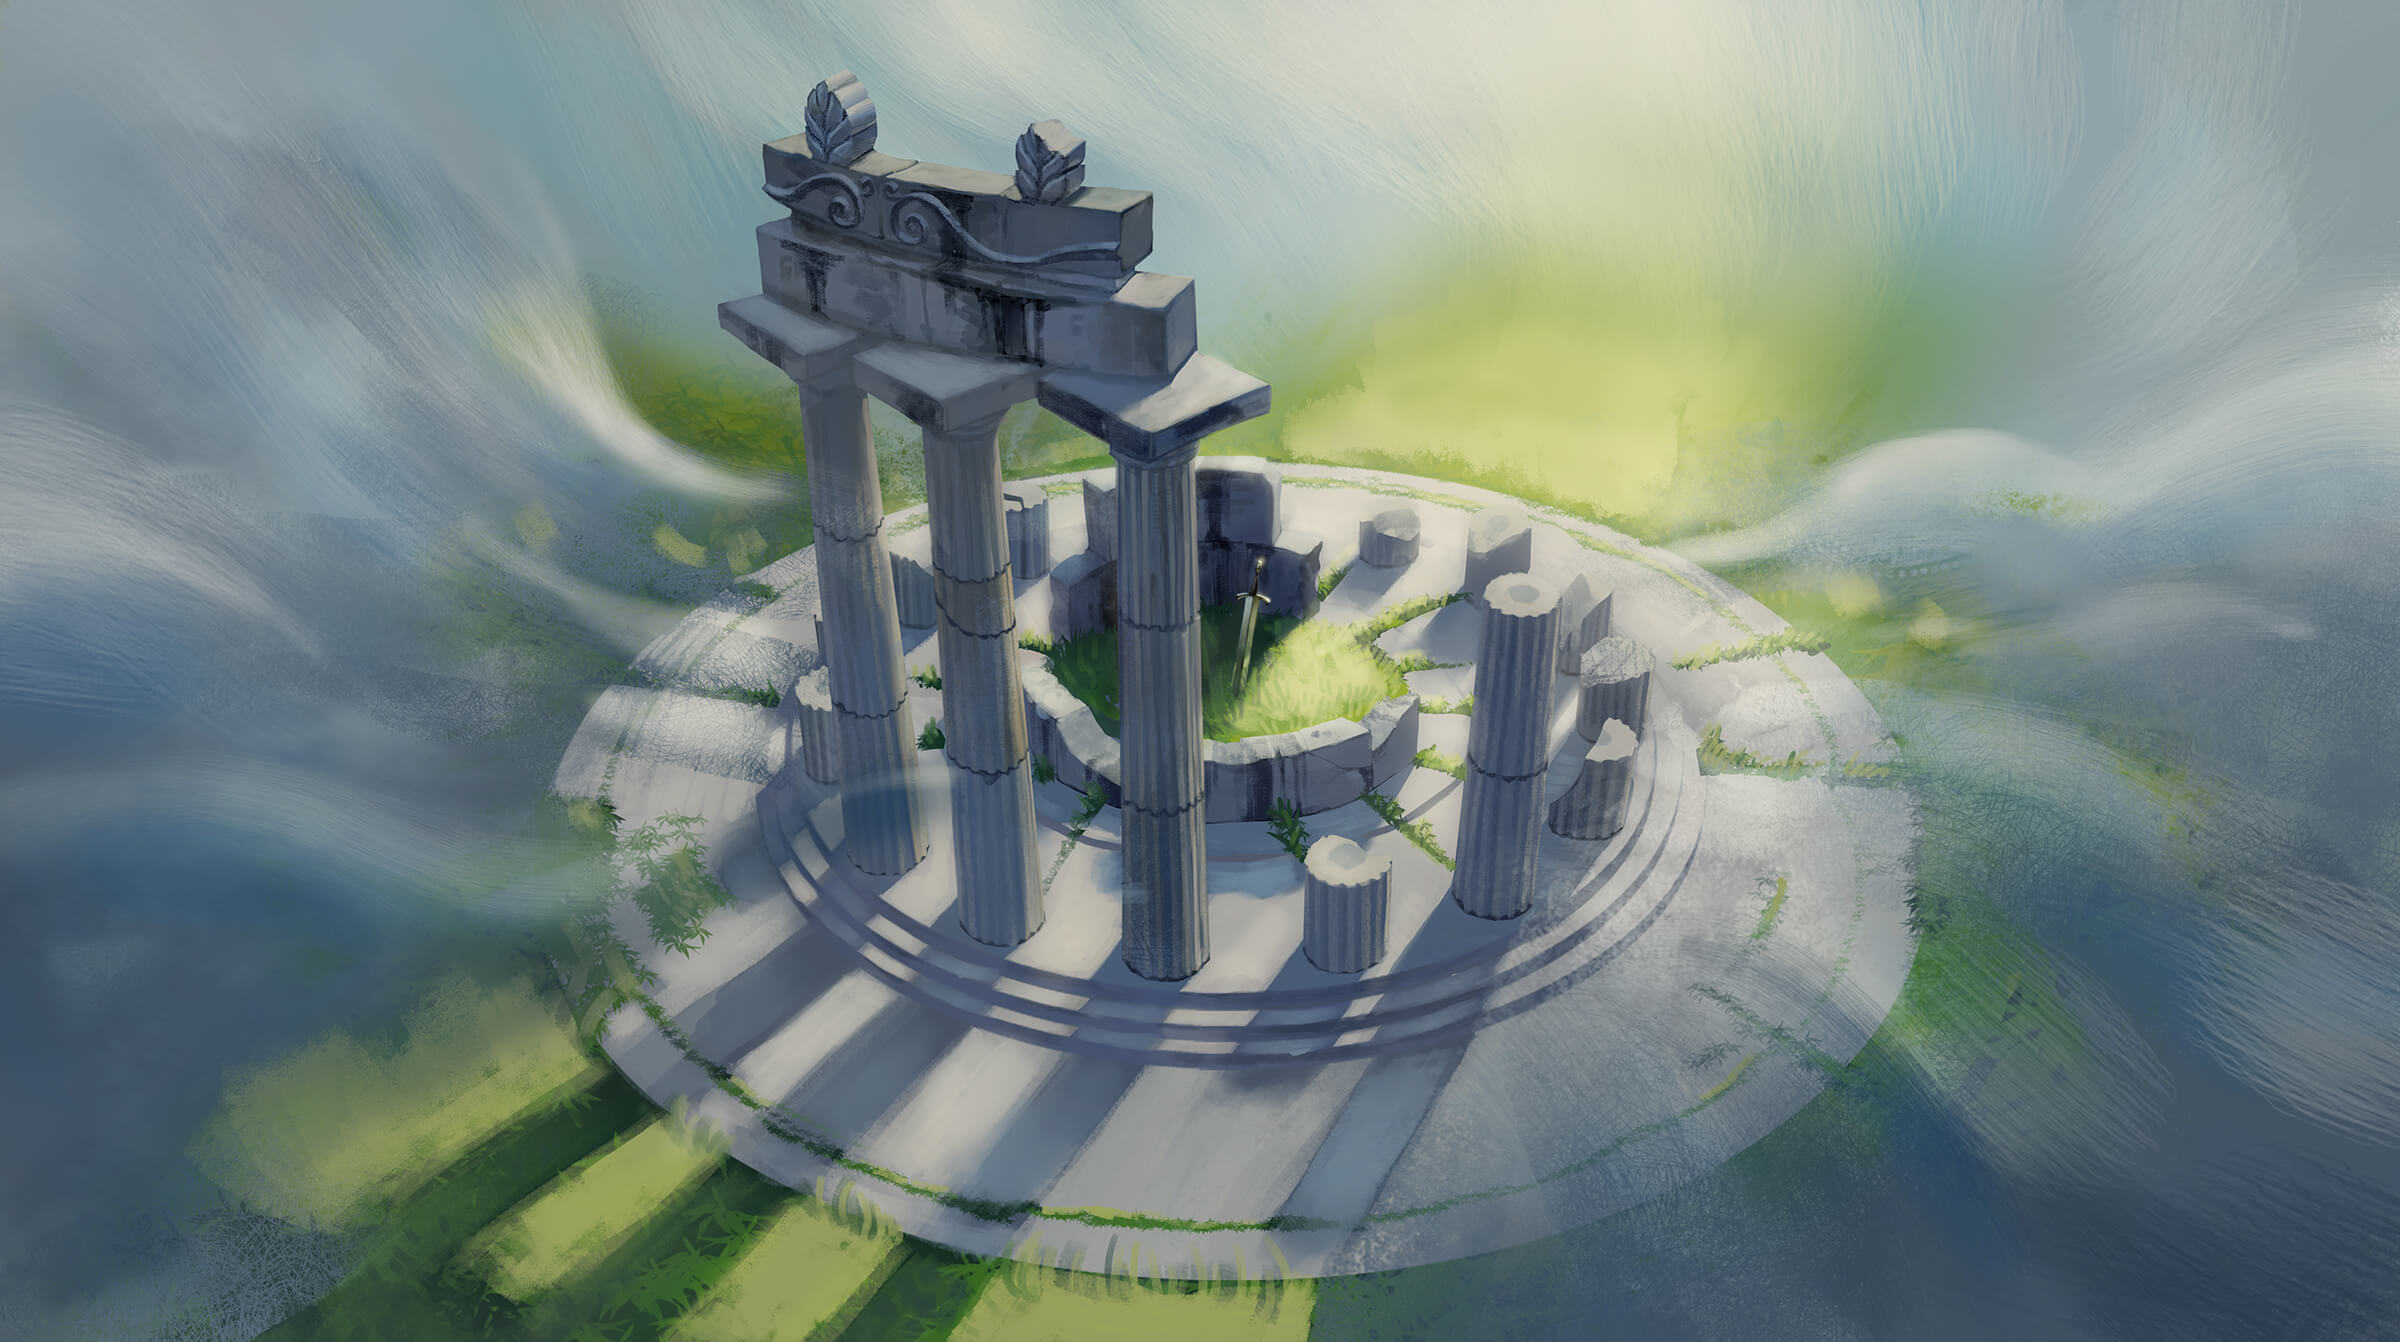 digital painting of a sword stuck in the ground, surrounded by a circle of columns, some in tact, most in disrepair